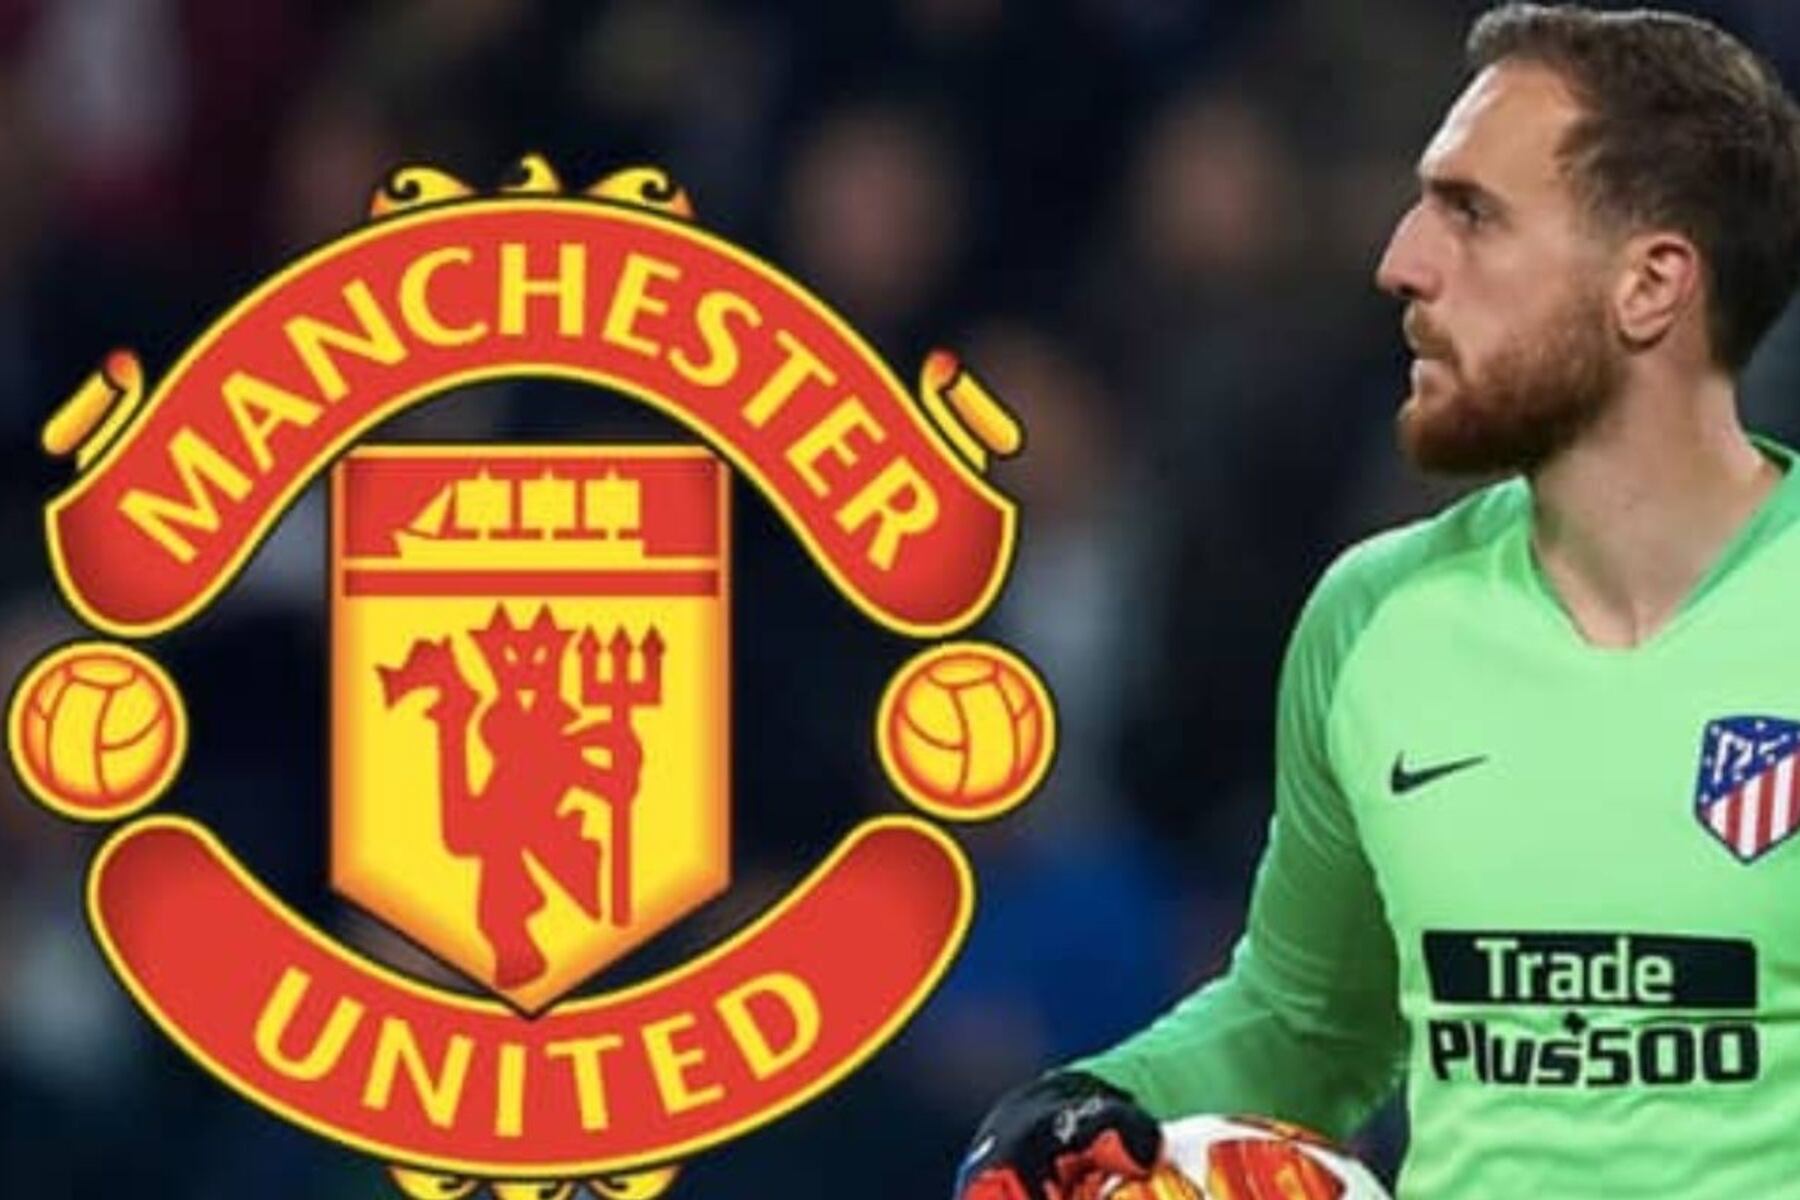 The most expensive goalkeeper in football history! This is what Manchester United will offer Jan Oblak